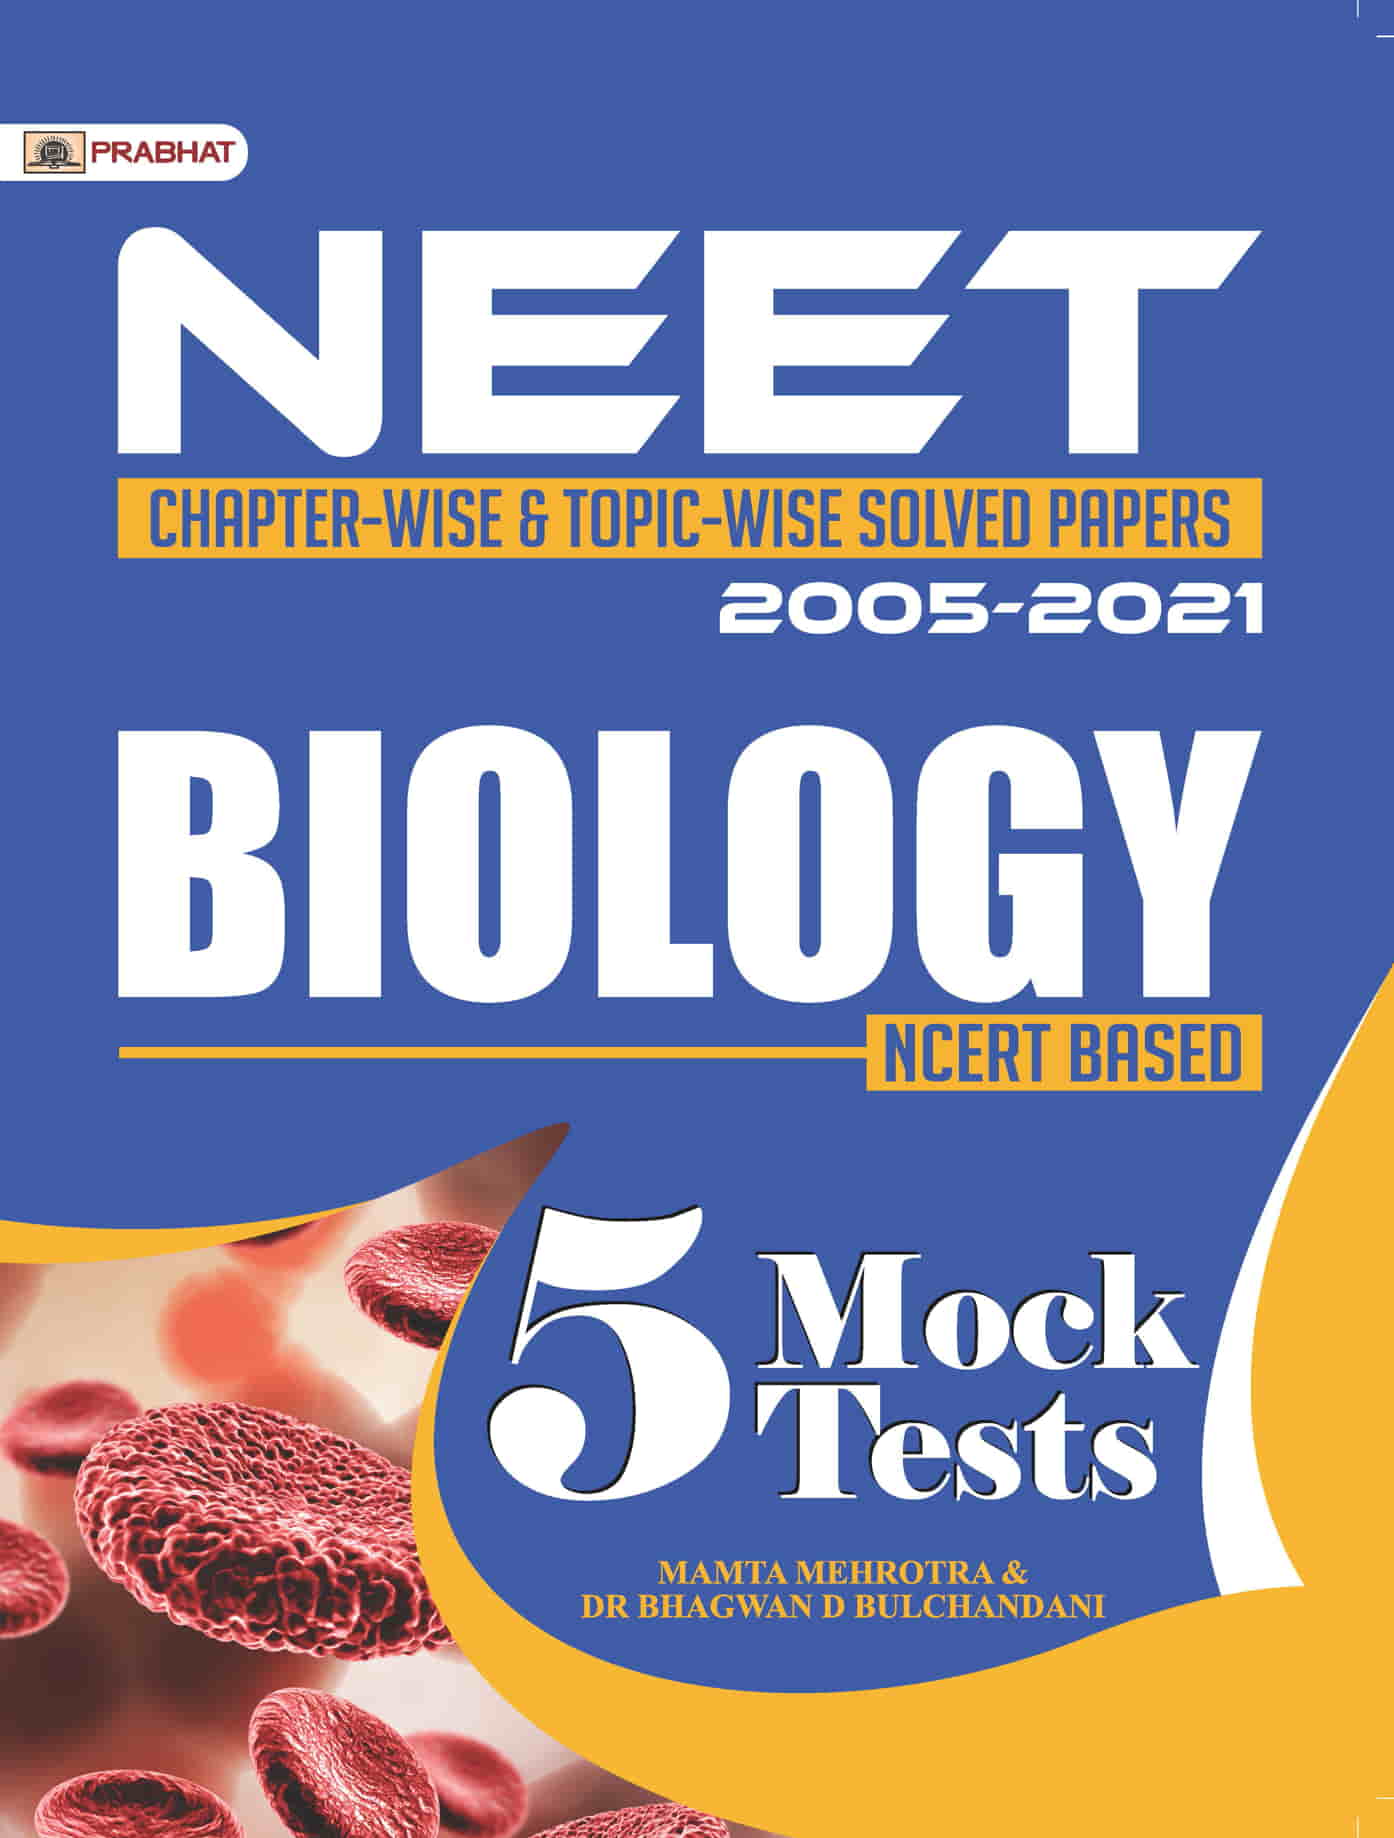 NEET Chapter-Wise & Topic-Wise Solved Papers: Biology (PB)